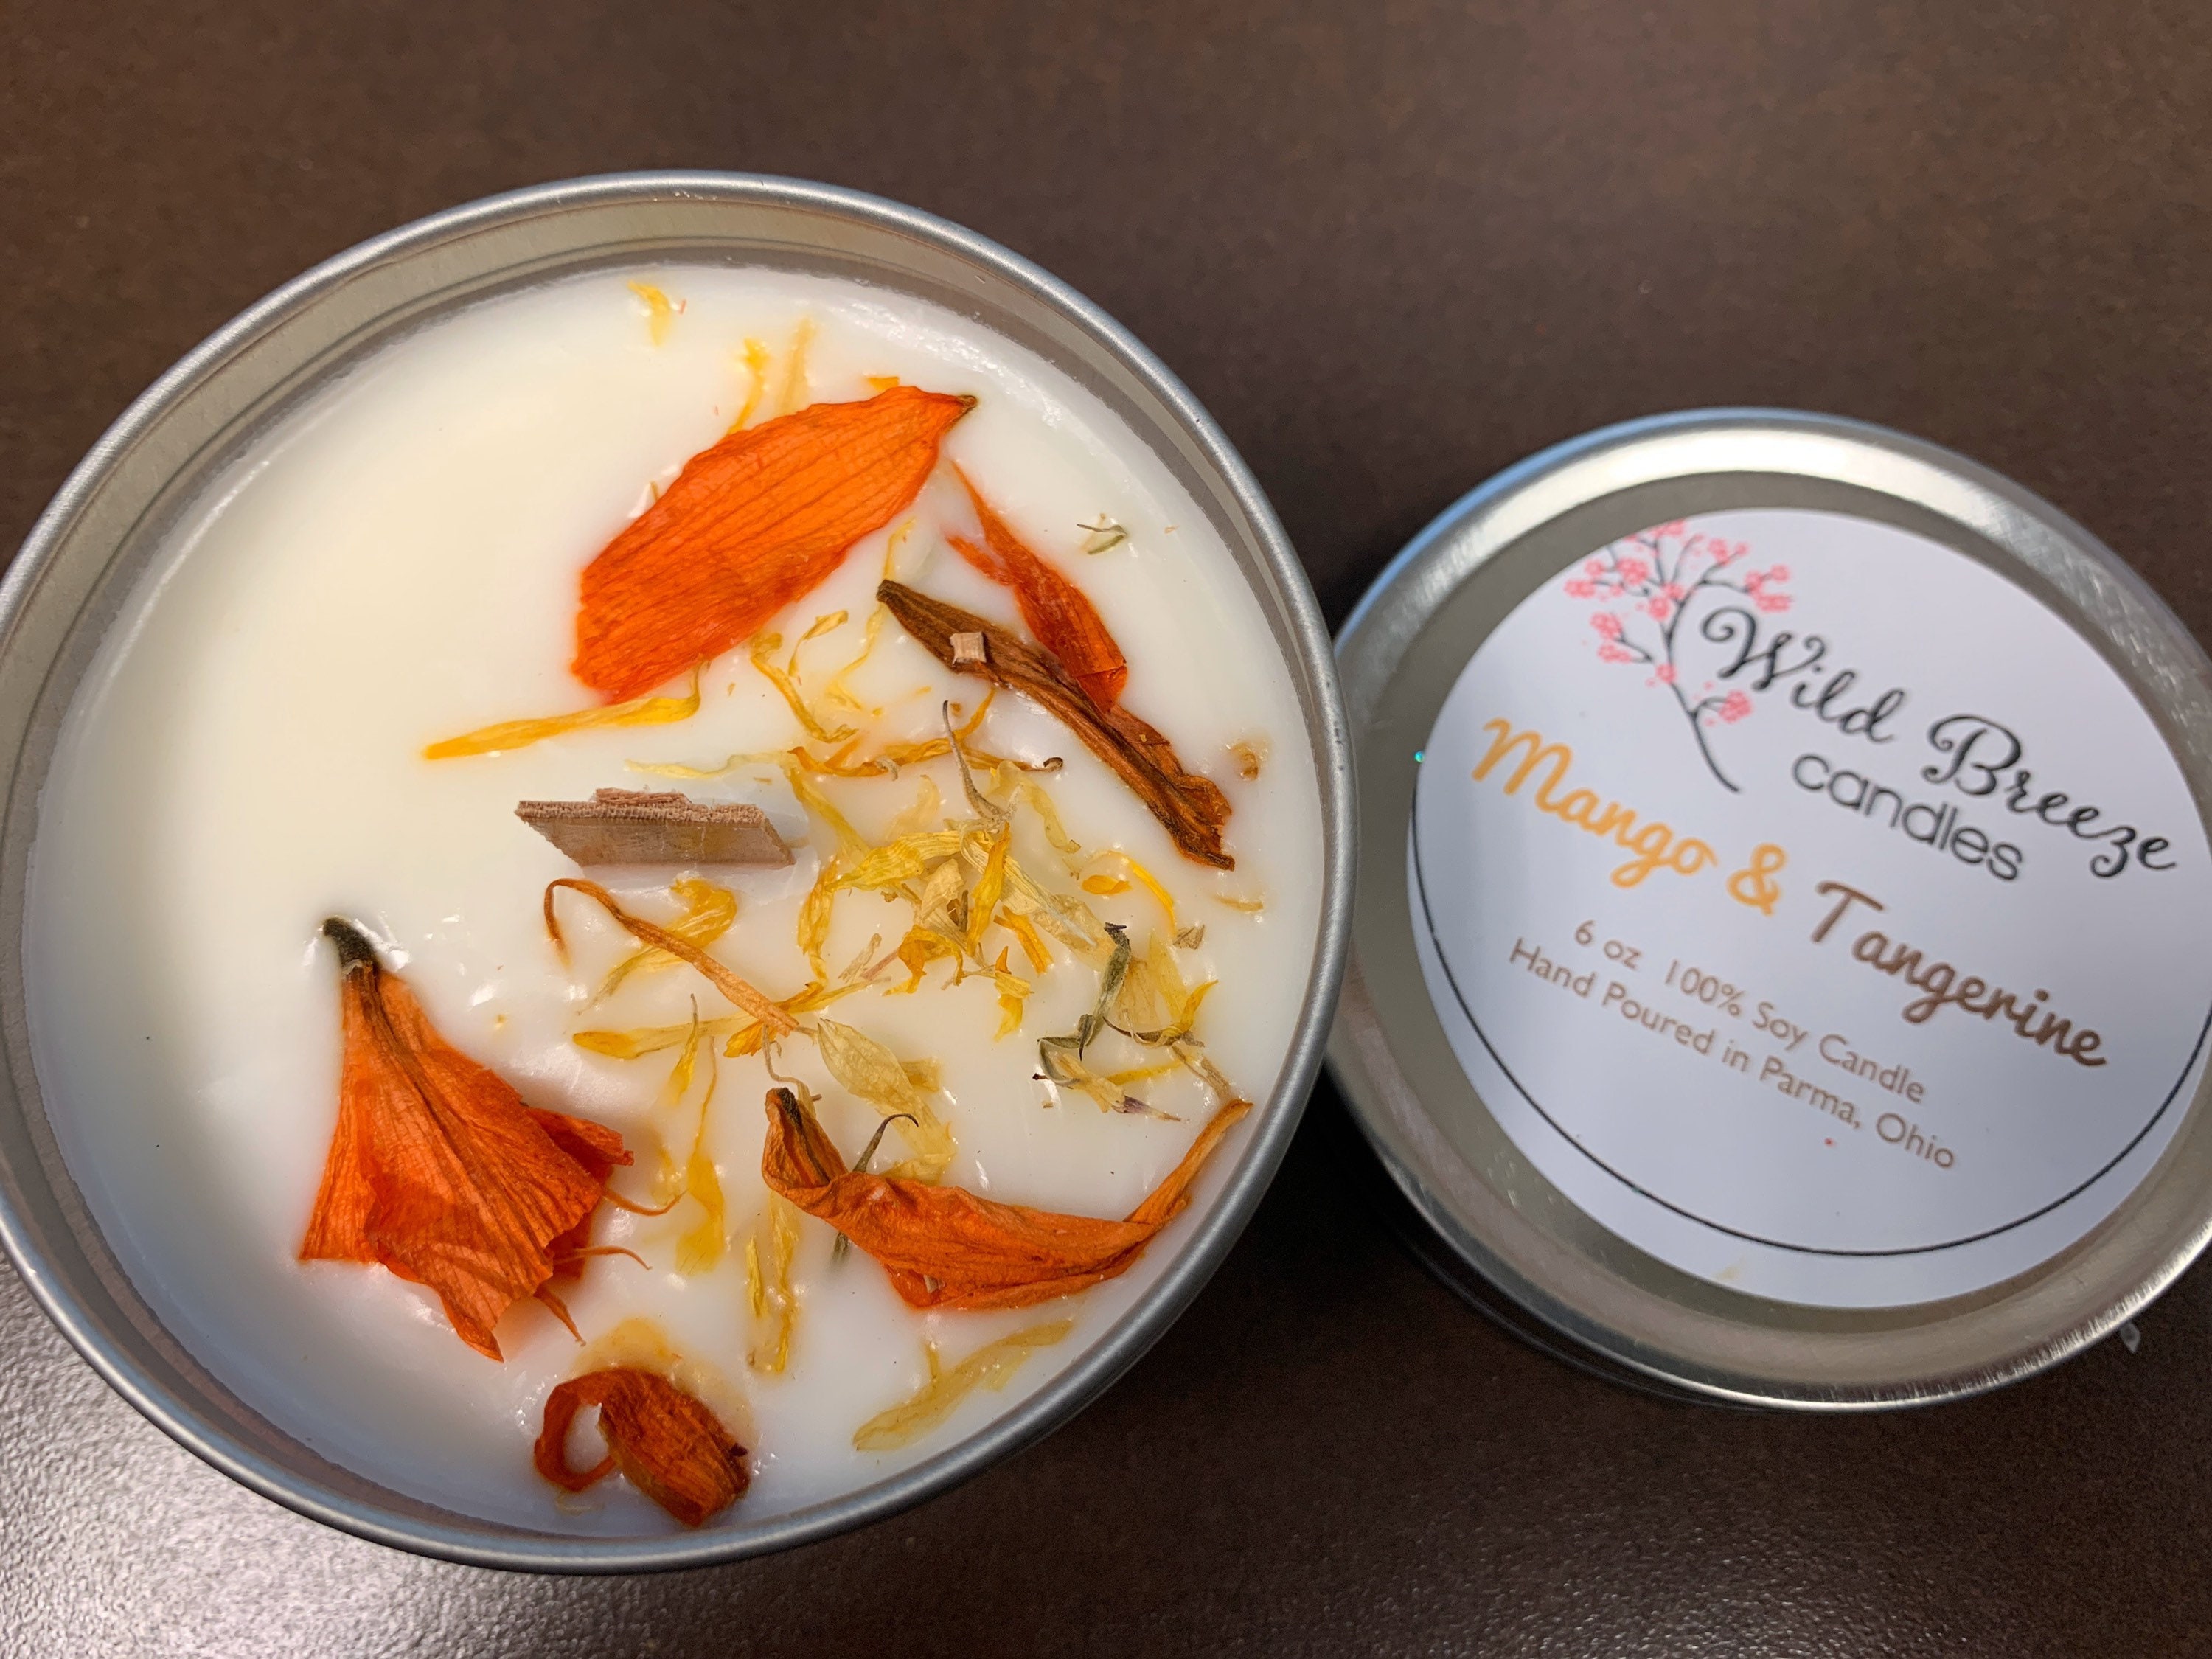 Ohio Peach ~ Hand Poured 100% Soy Wax Wooden Wick Candles